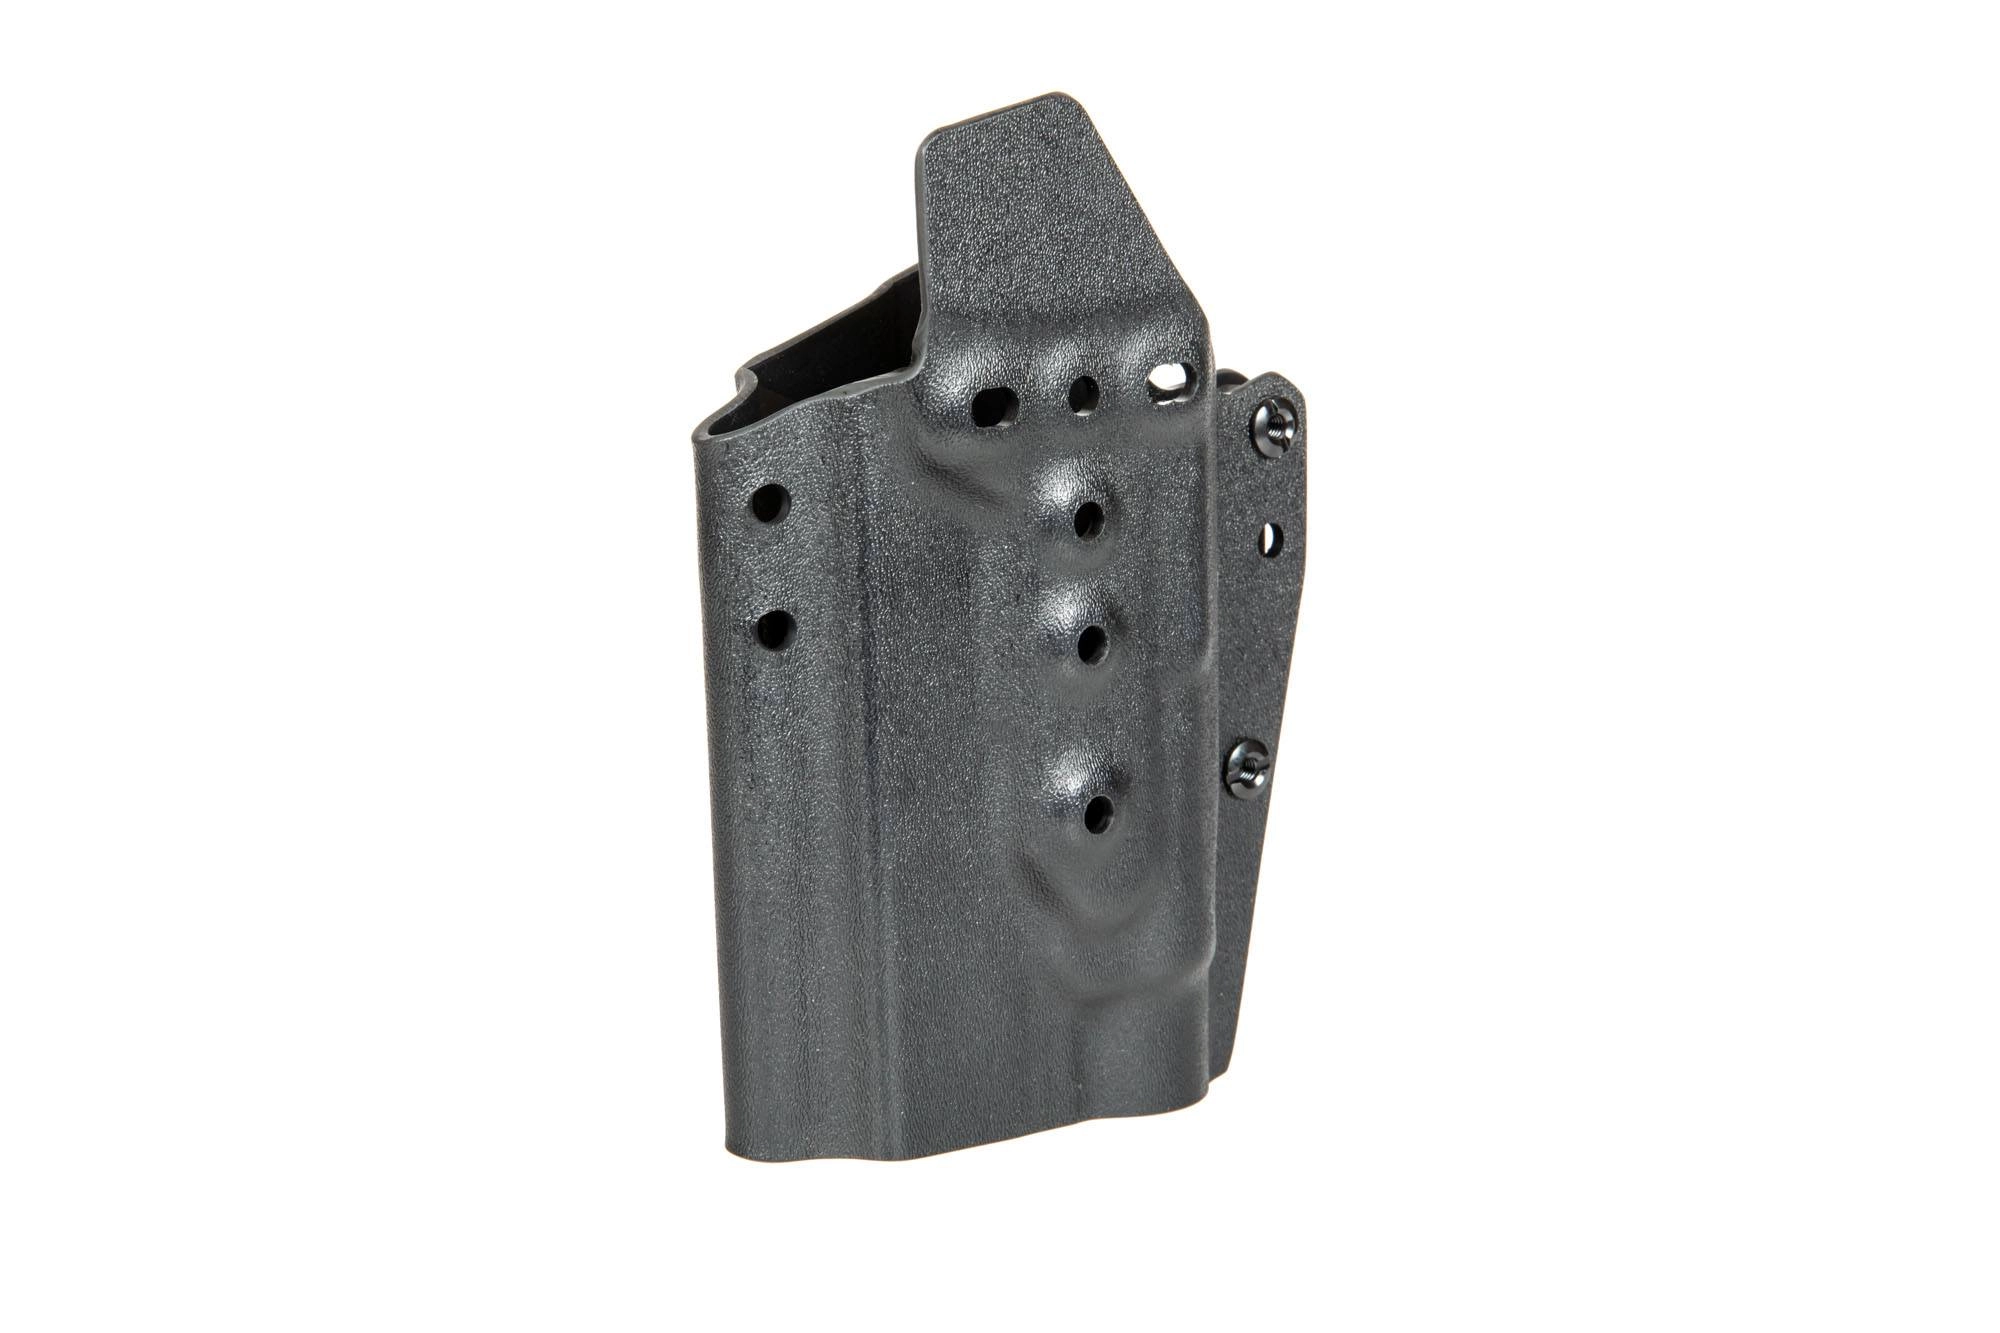 Kydex Holster for G17 replicas with TLR-1 Flashlight - Black